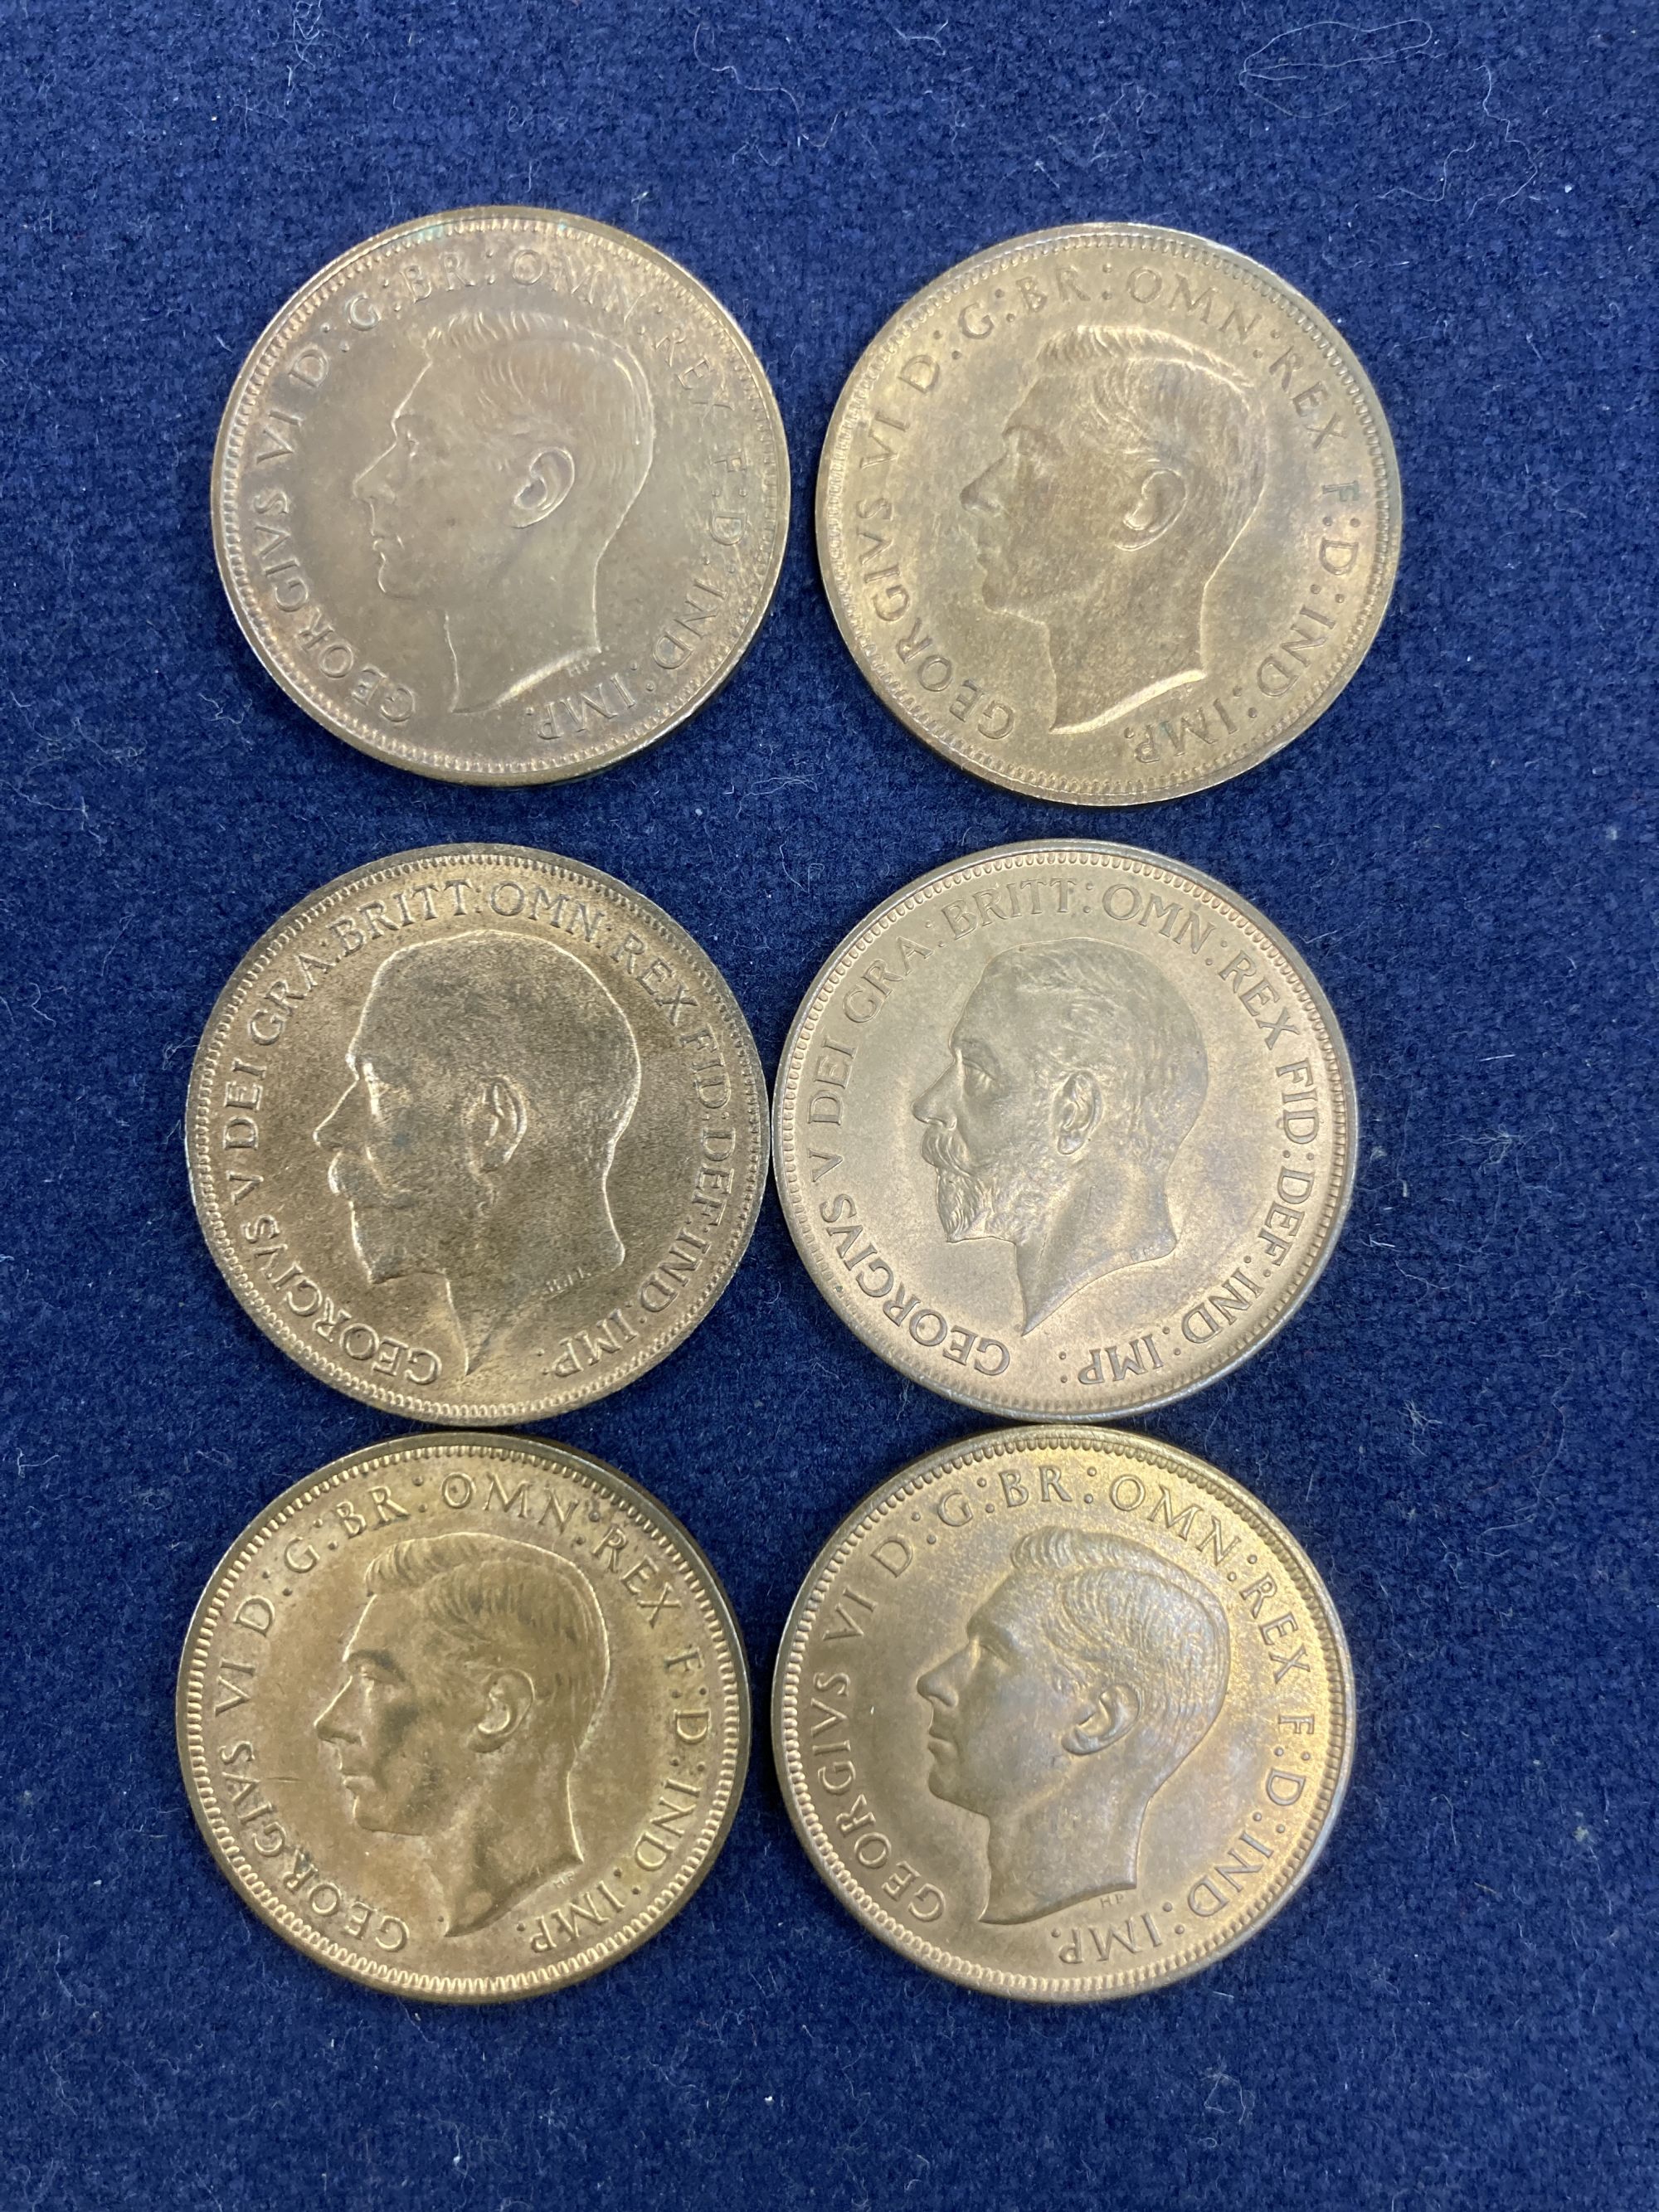 George V and George VI one pennies, 1917, 1936, 1937, 1938, 1939 and 1940, all UNC with much lustre